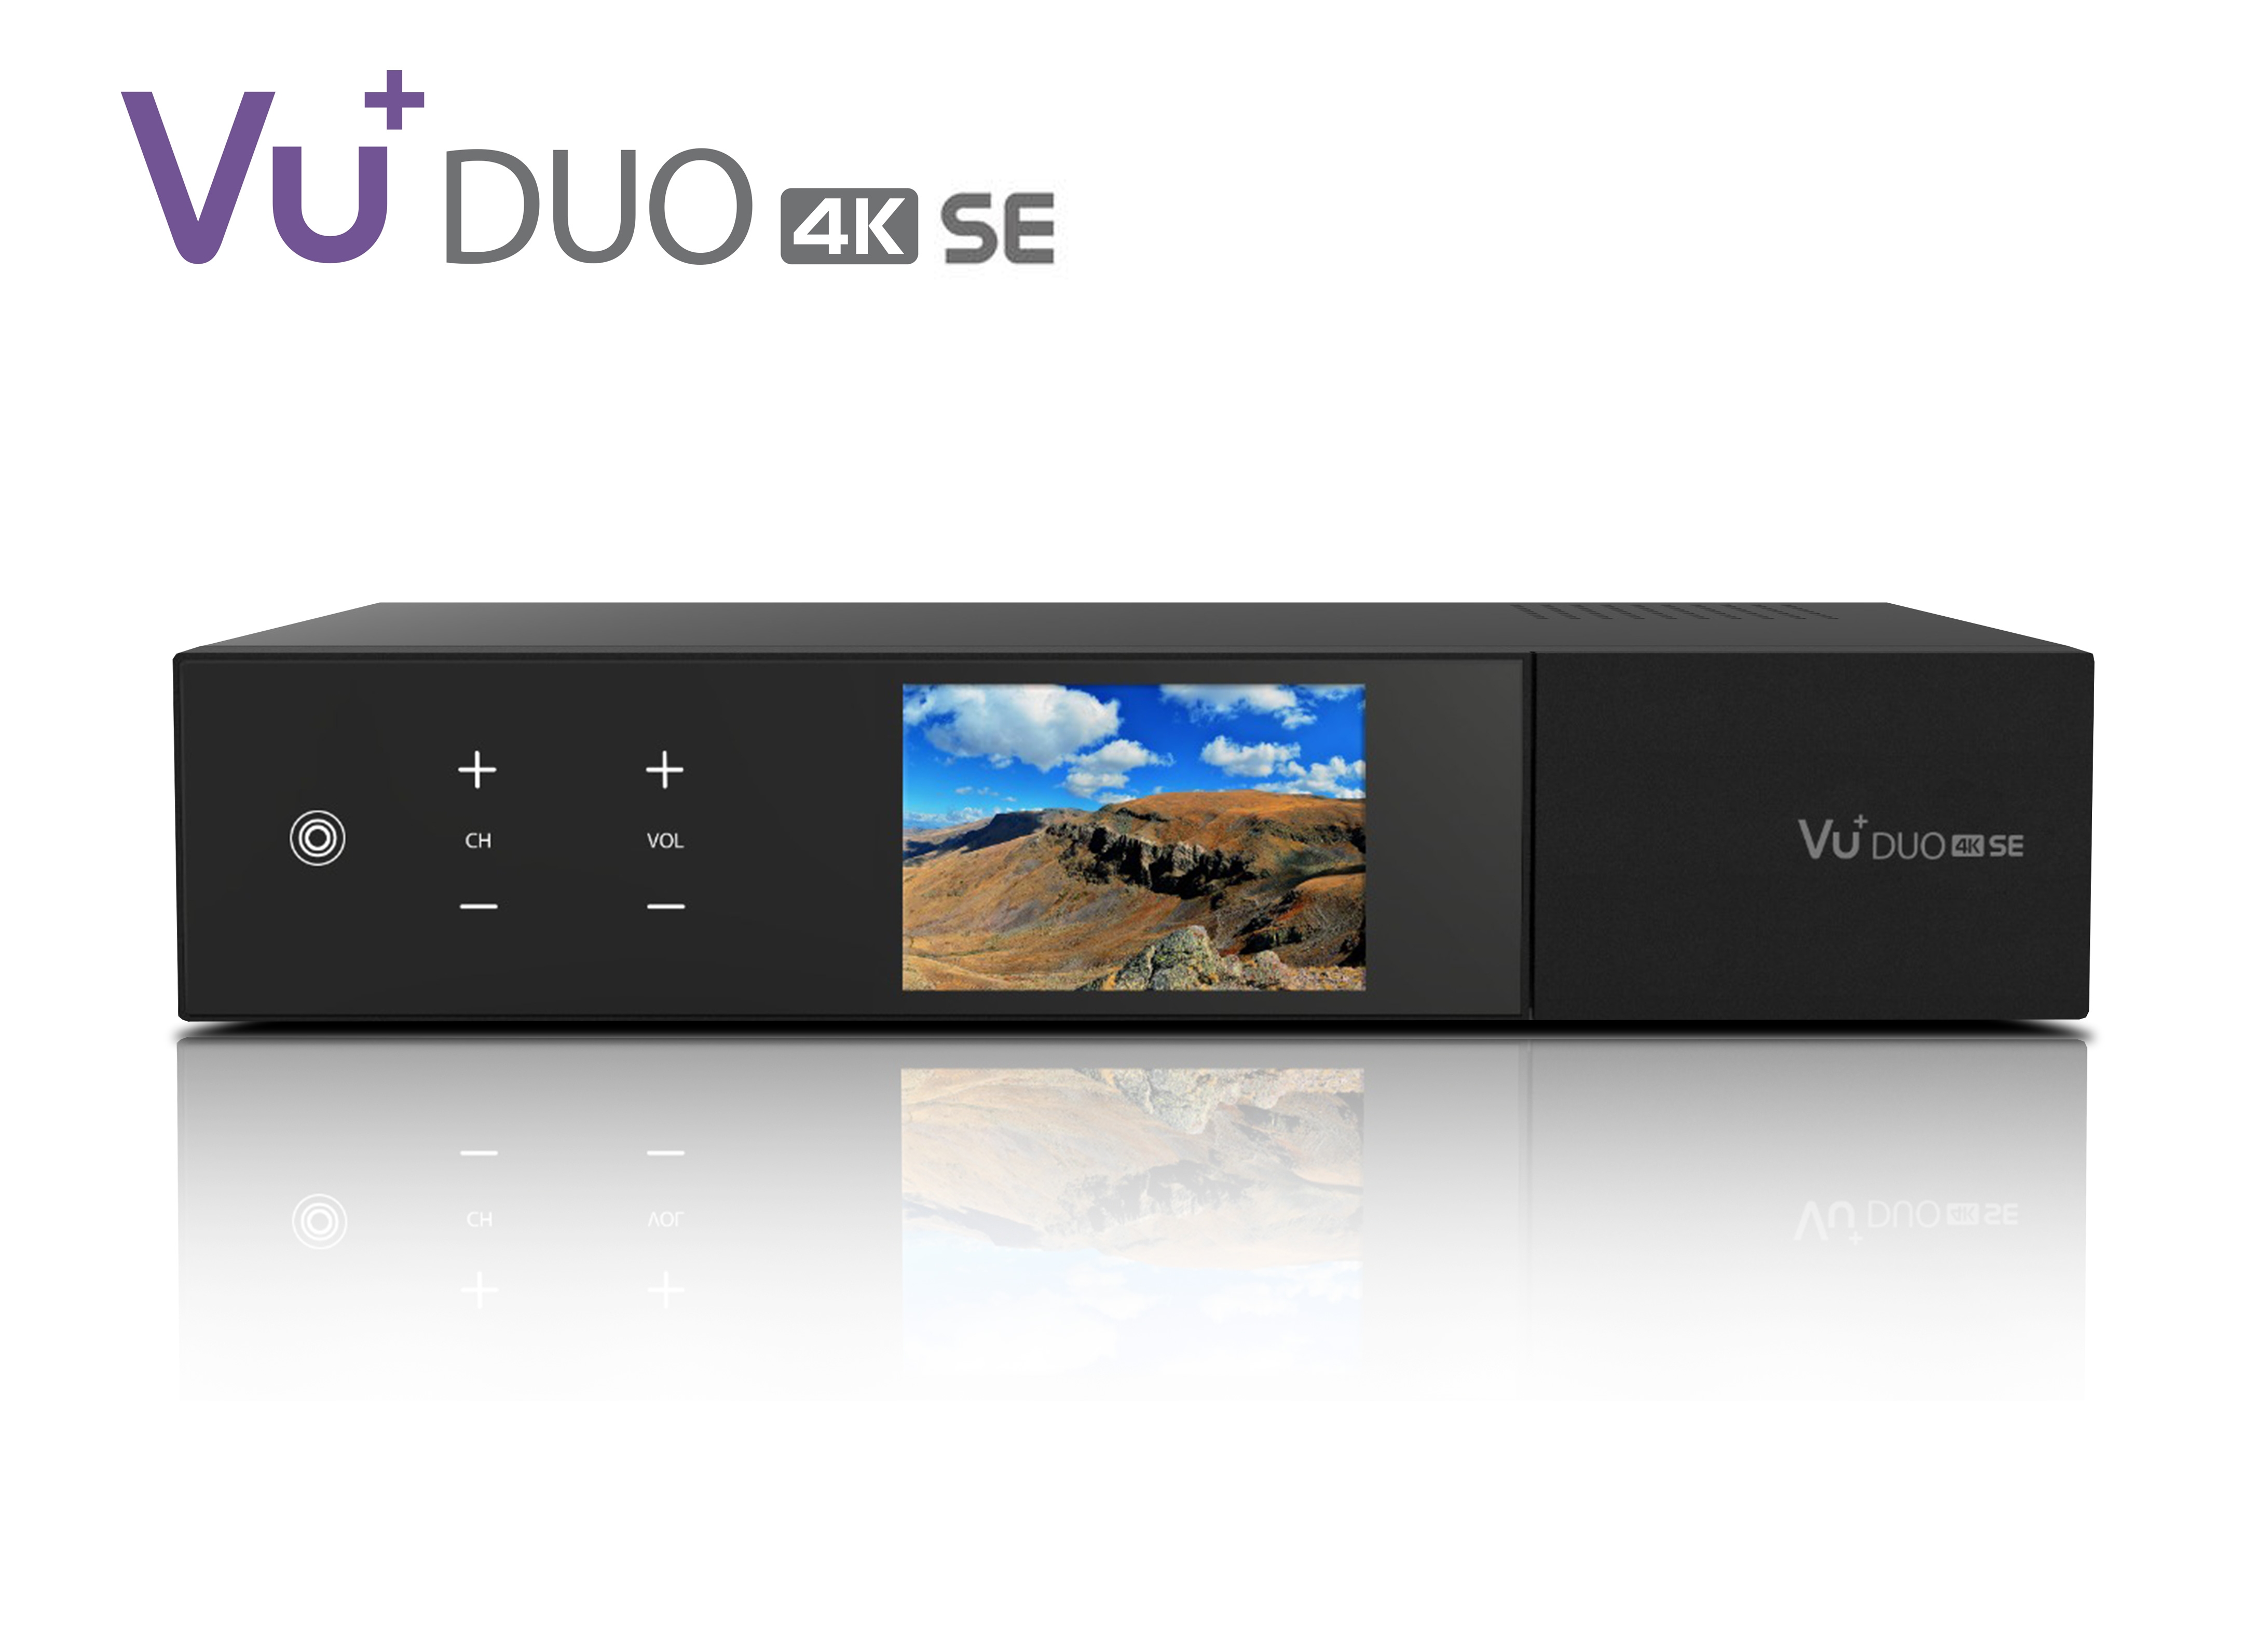 VU+ Duo 4K SE 1x DVB-S2X FBC Twin / 1x DVB-C FBC Tuner PVR ready Linux Receiver UHD 2160p